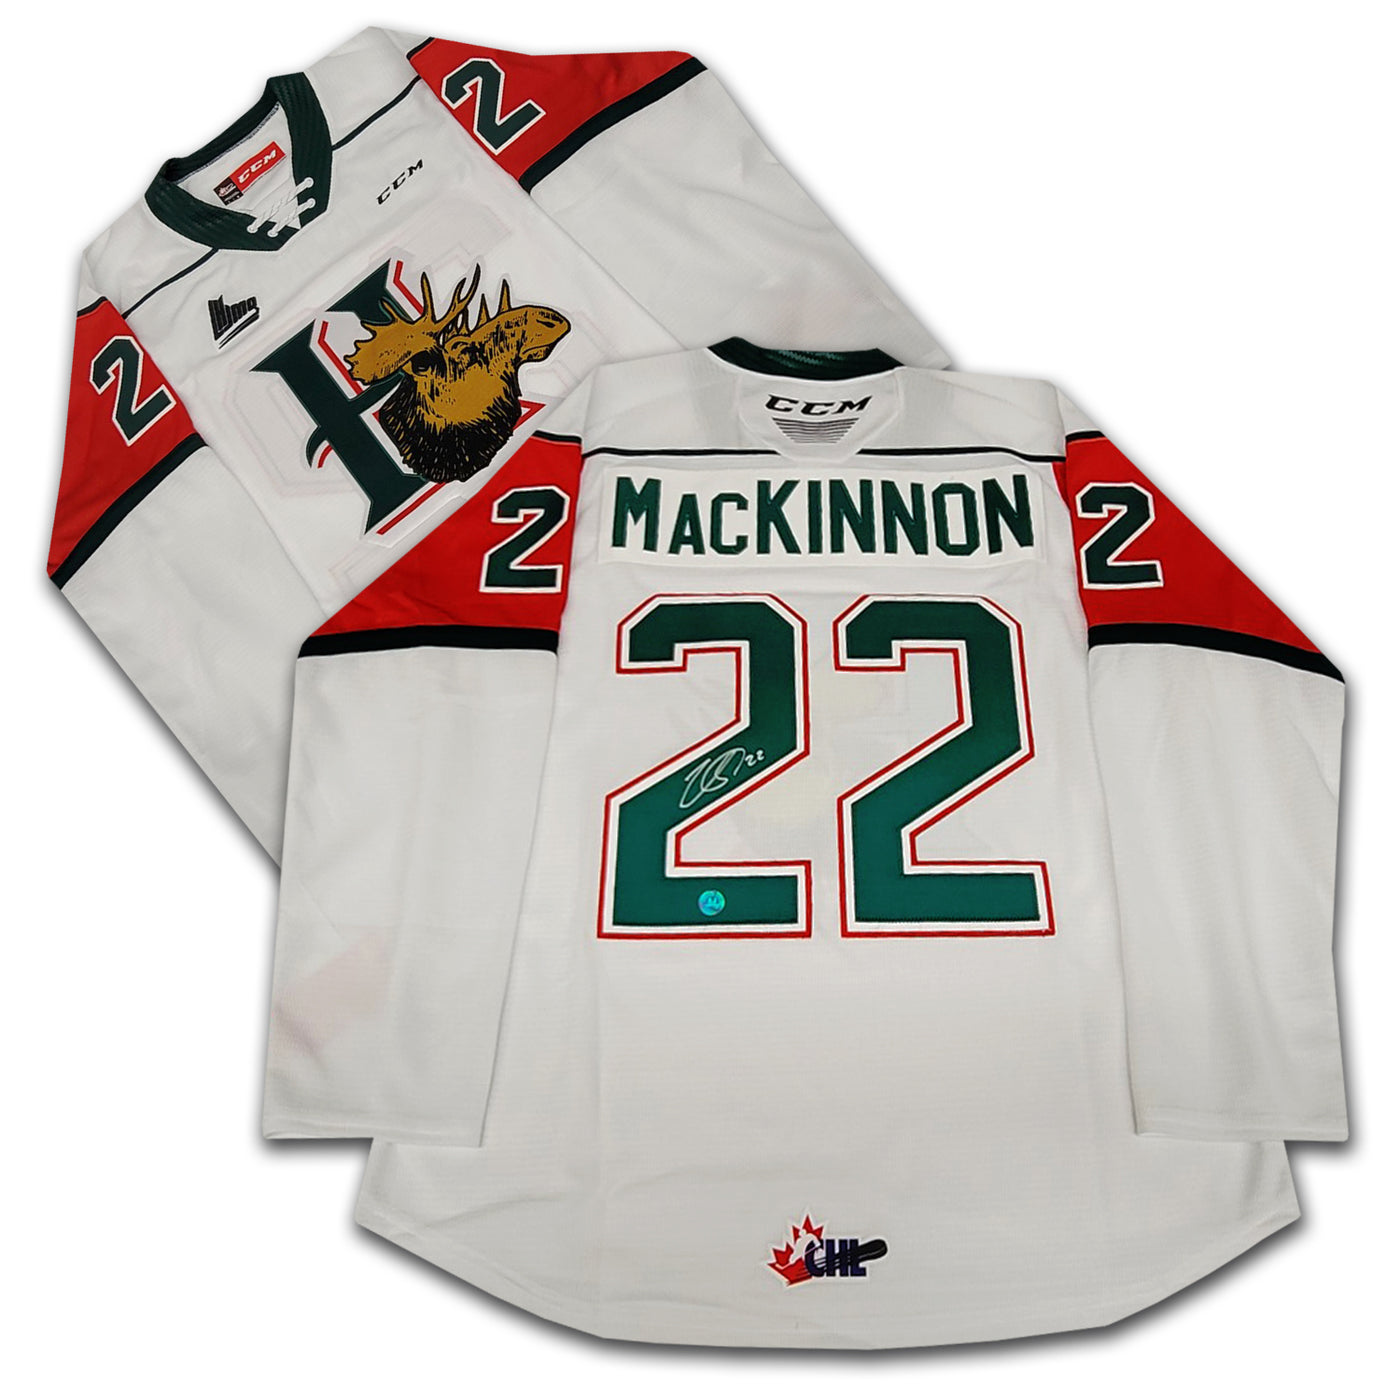 Nathan Mackinnon Halifax Moose Heads Autographed White CCM Jersey